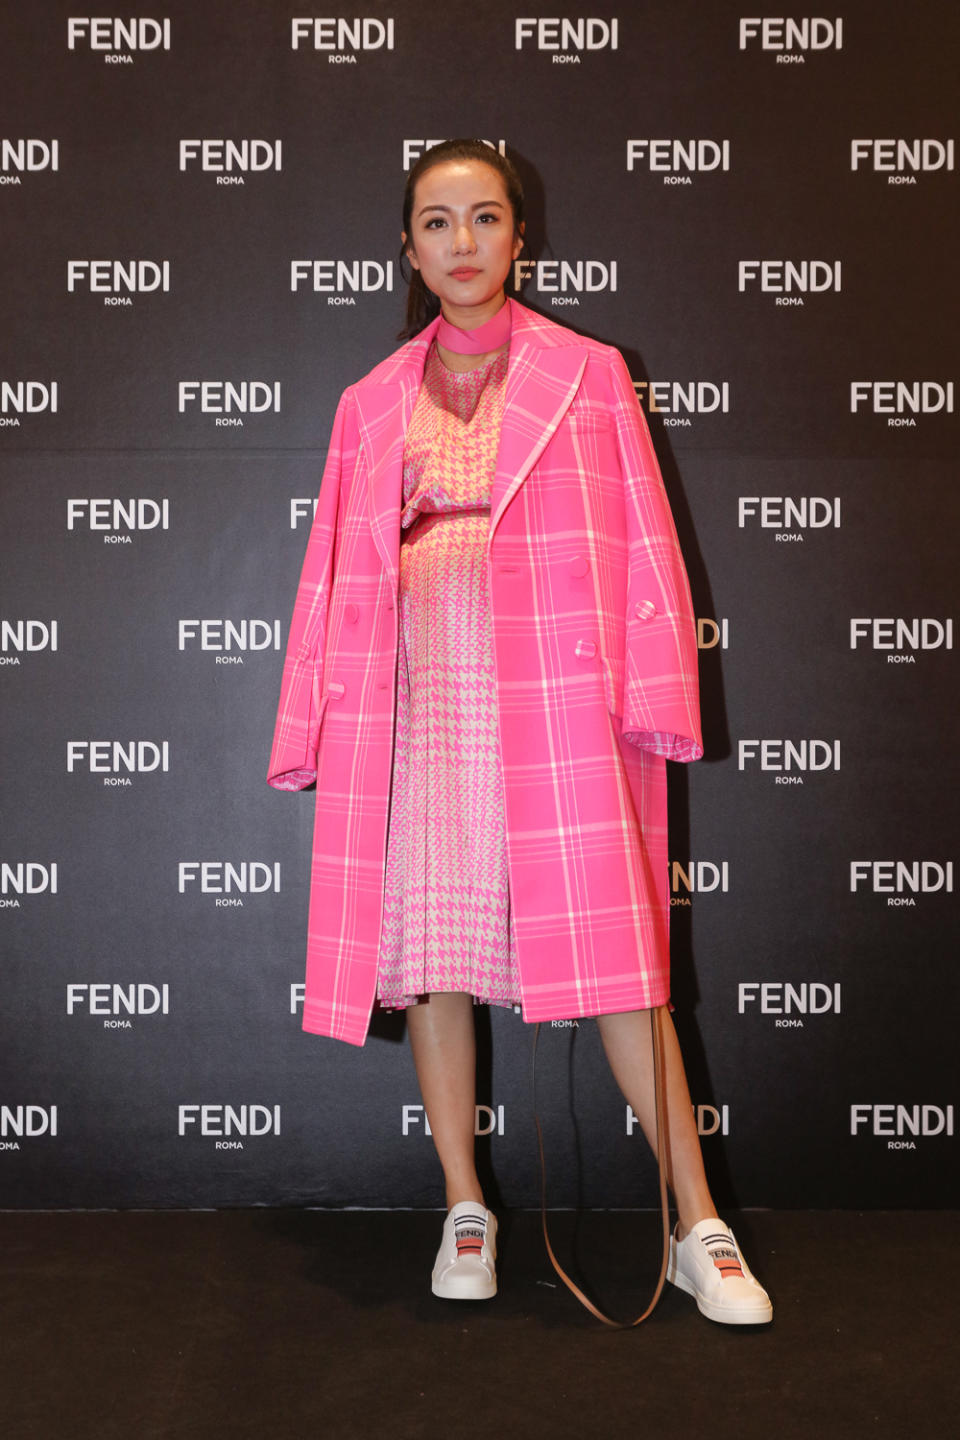 Stars attend Fendi’s store opening at ION Orchard